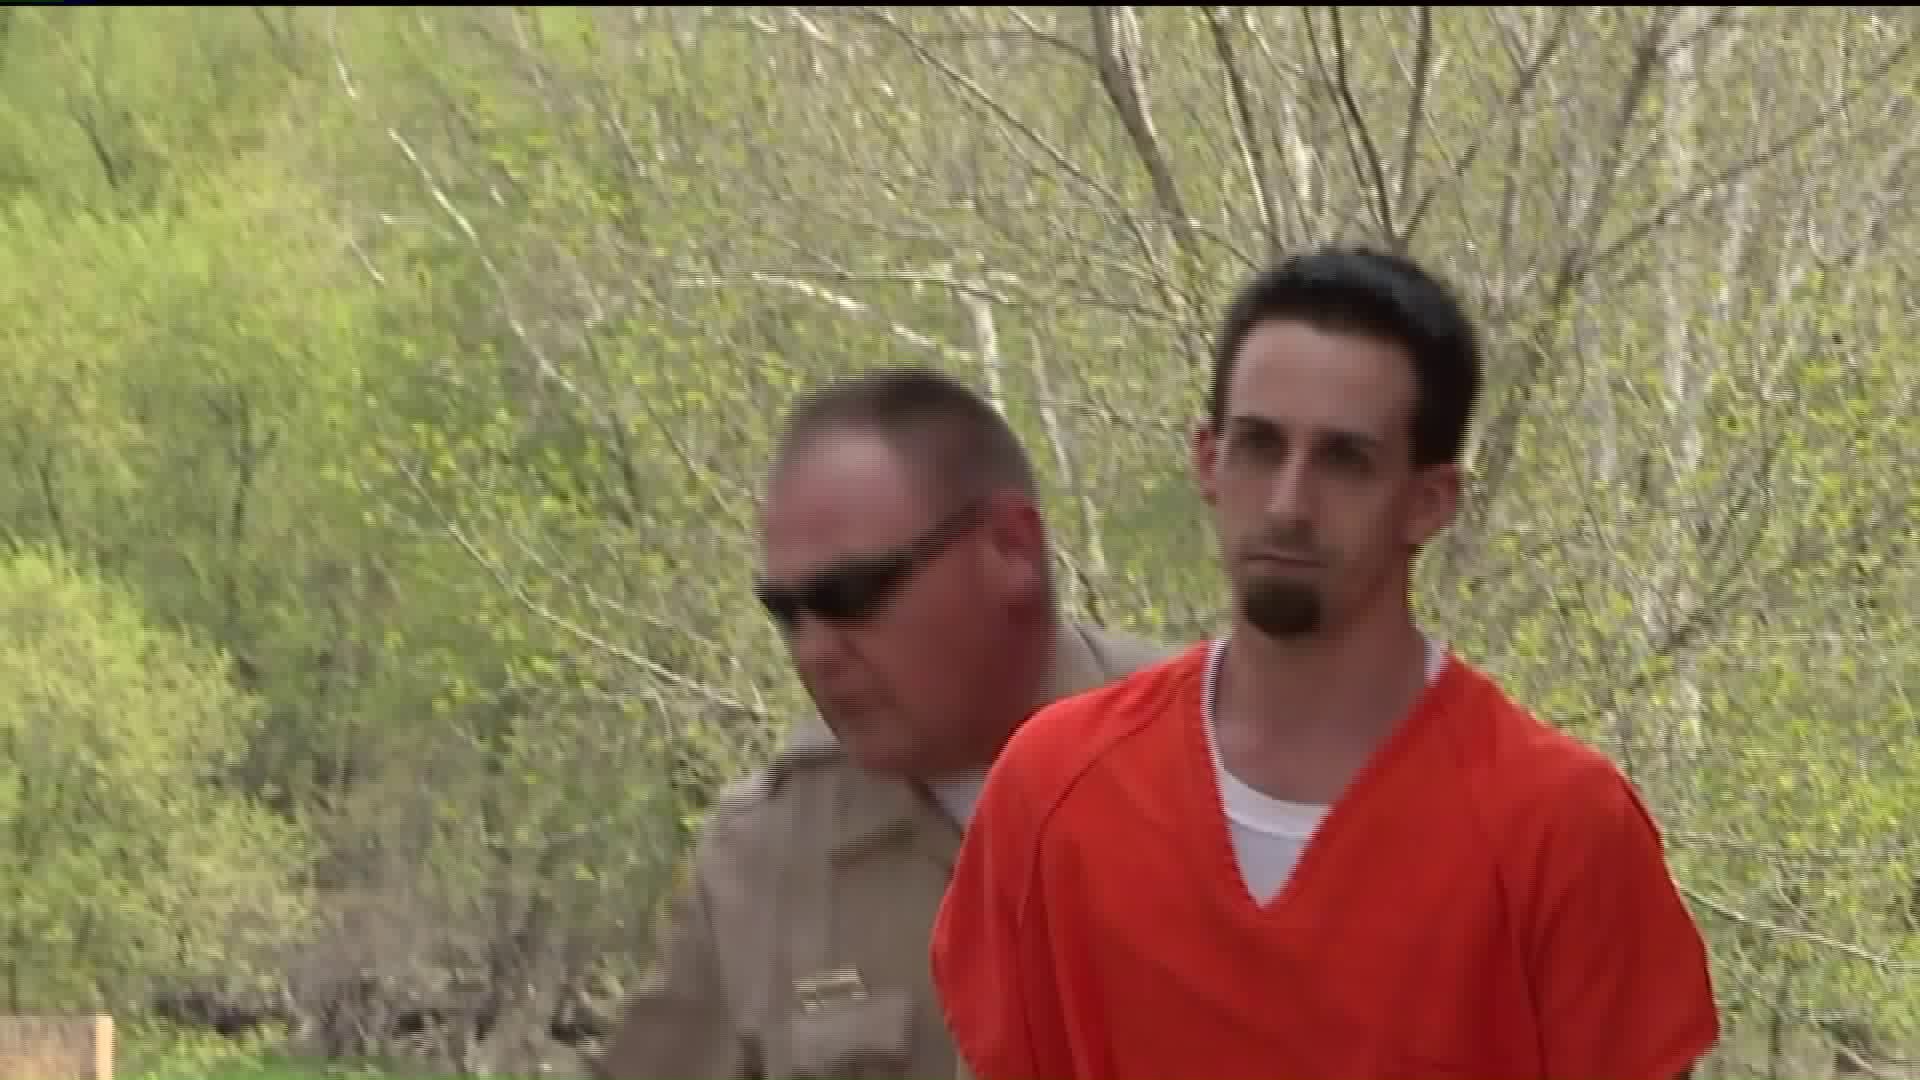 Prison Sentence for Man Who Admitted Killing Toddler